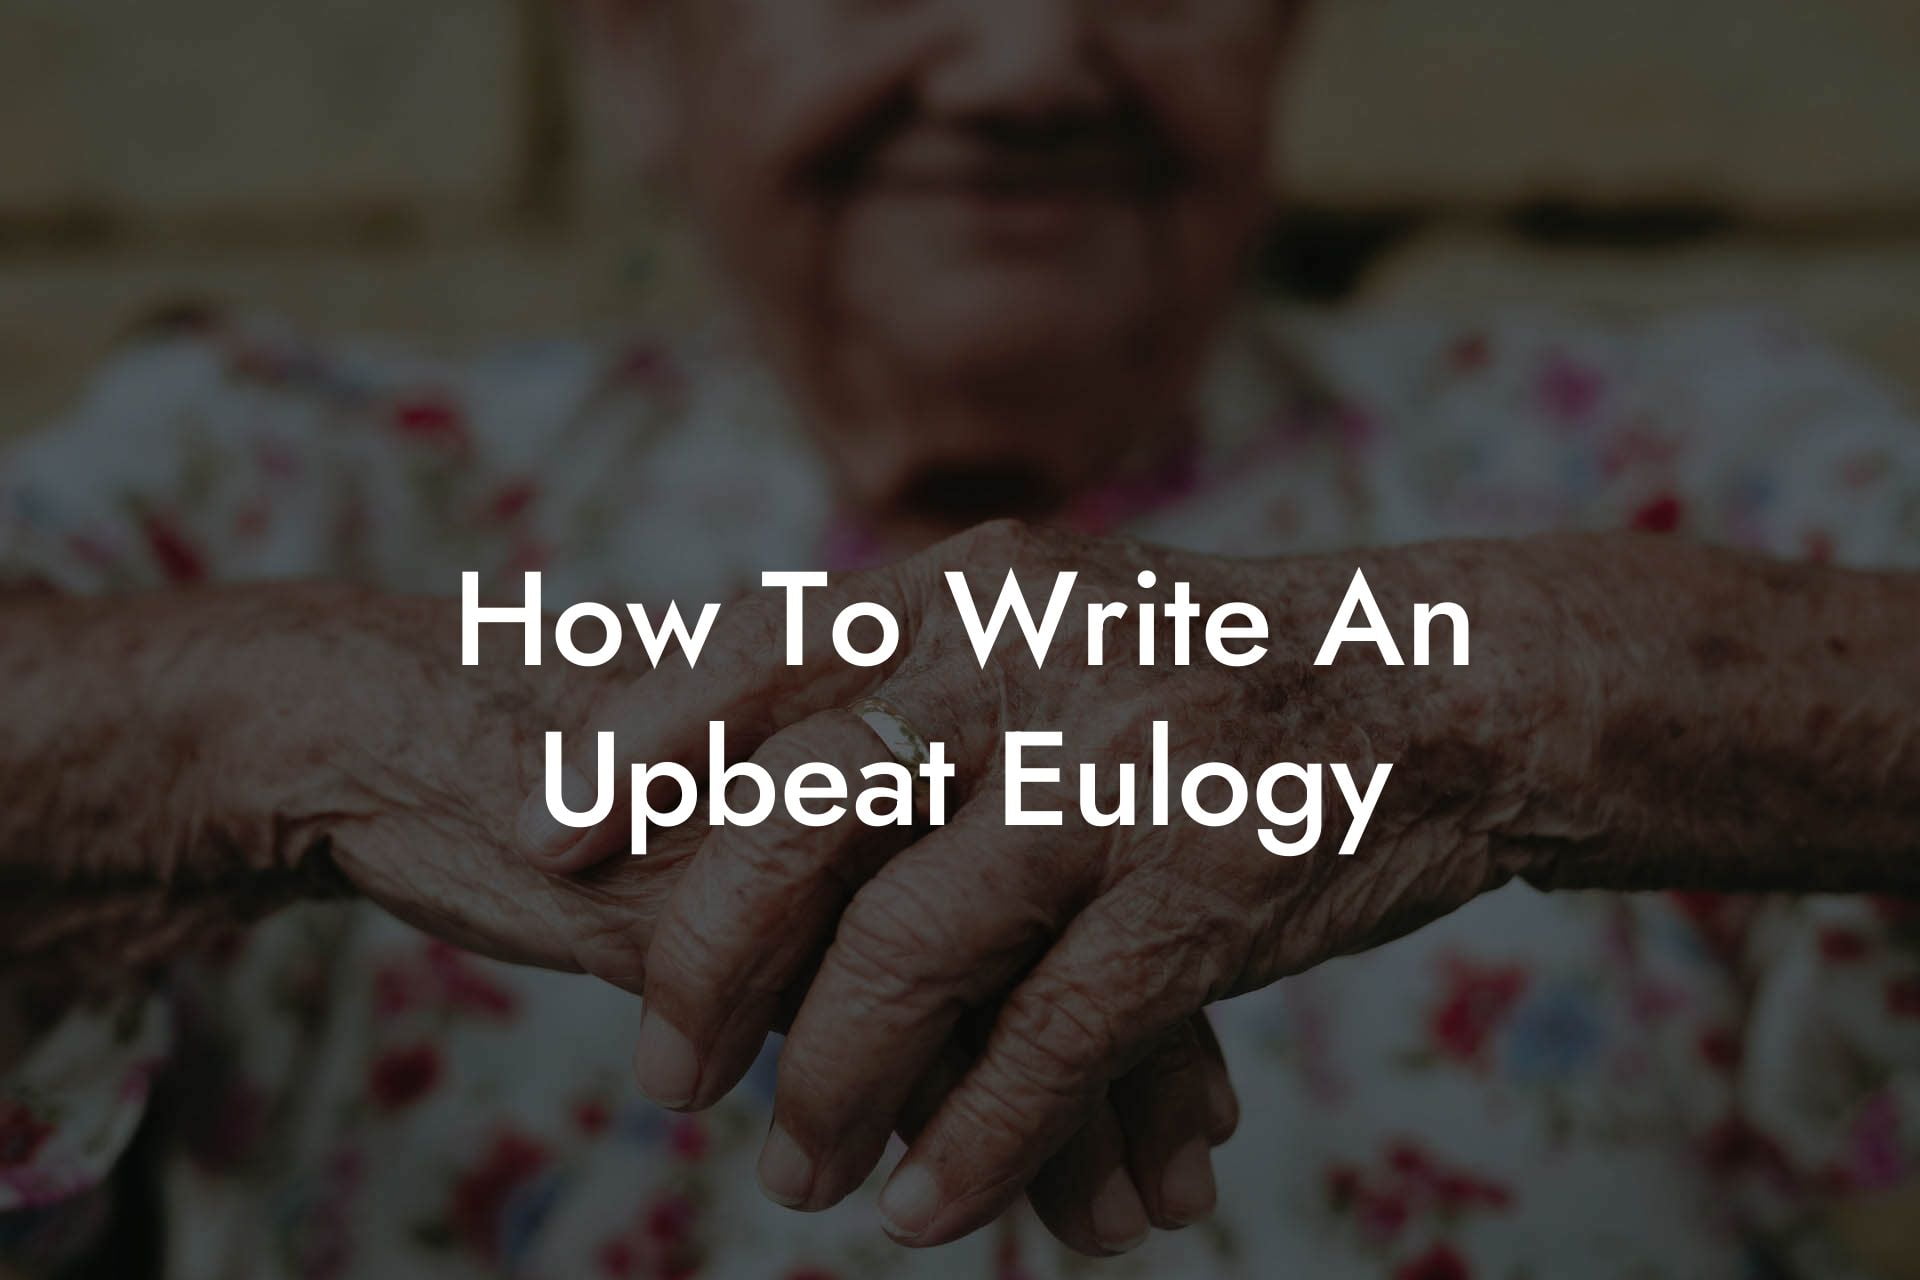 How To Write An Upbeat Eulogy